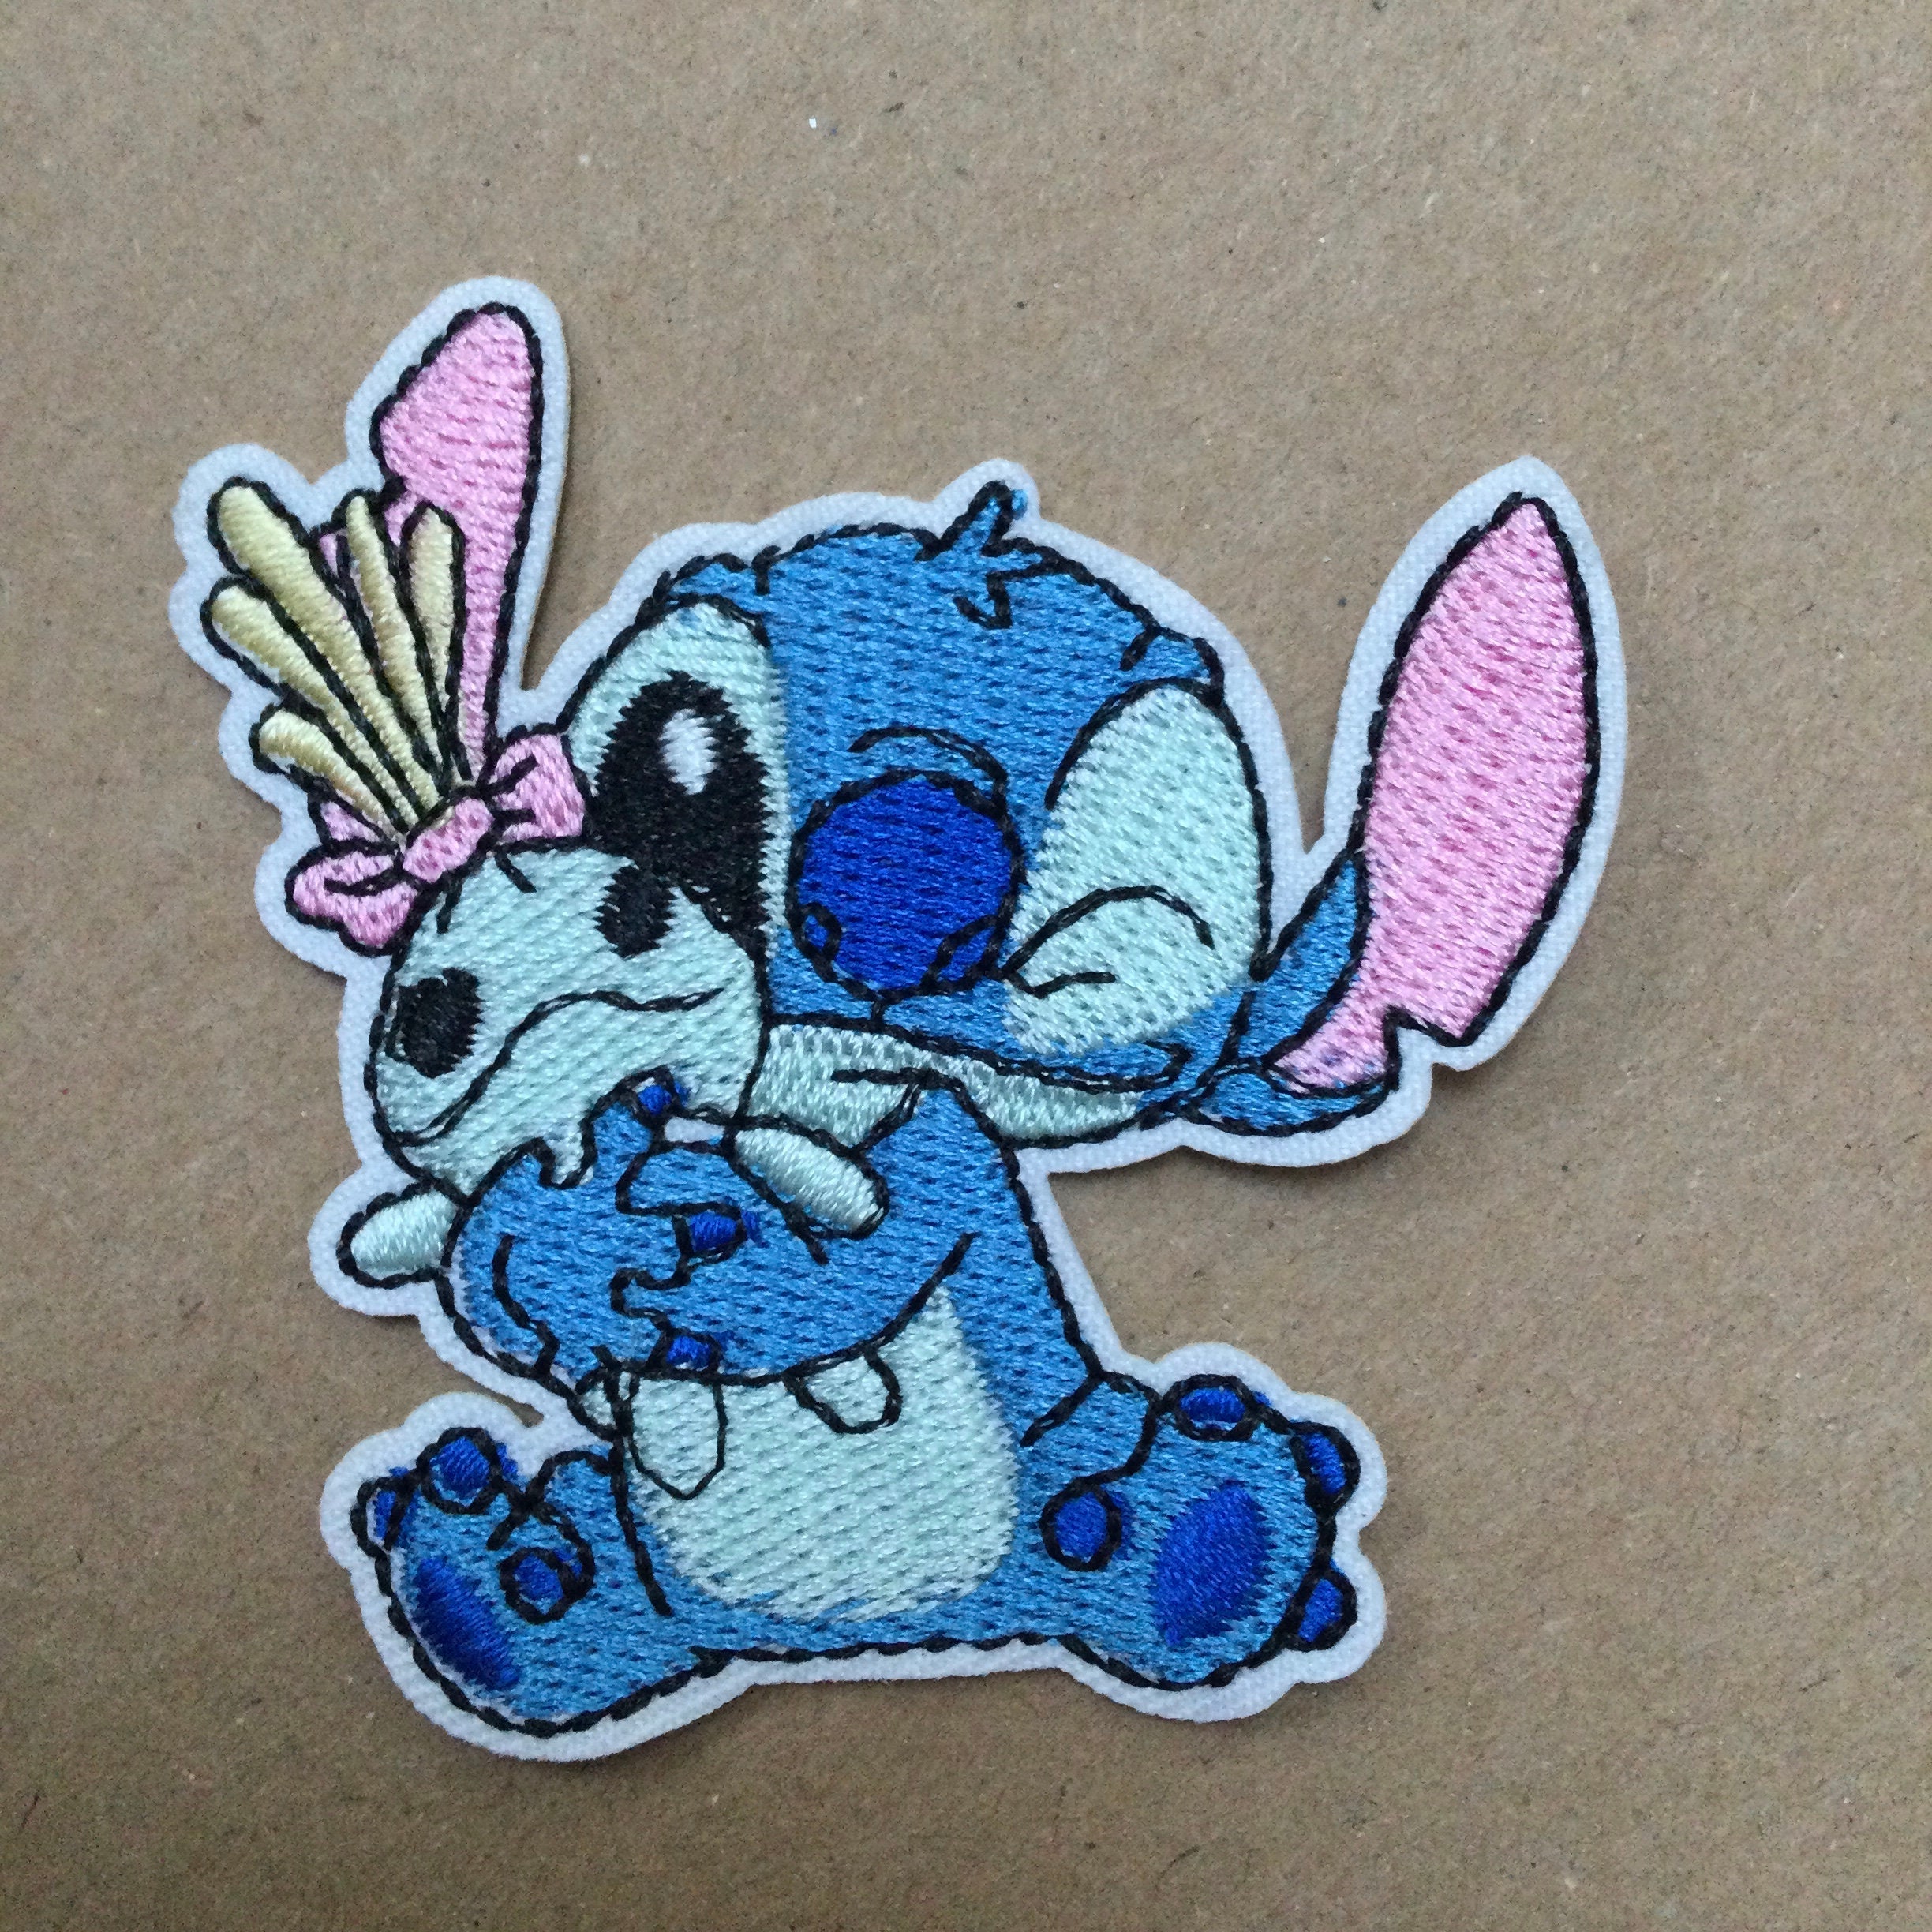 Jumba Jookiba Lilo And Stitch Filled Embroidery Design 1 - Instant Download